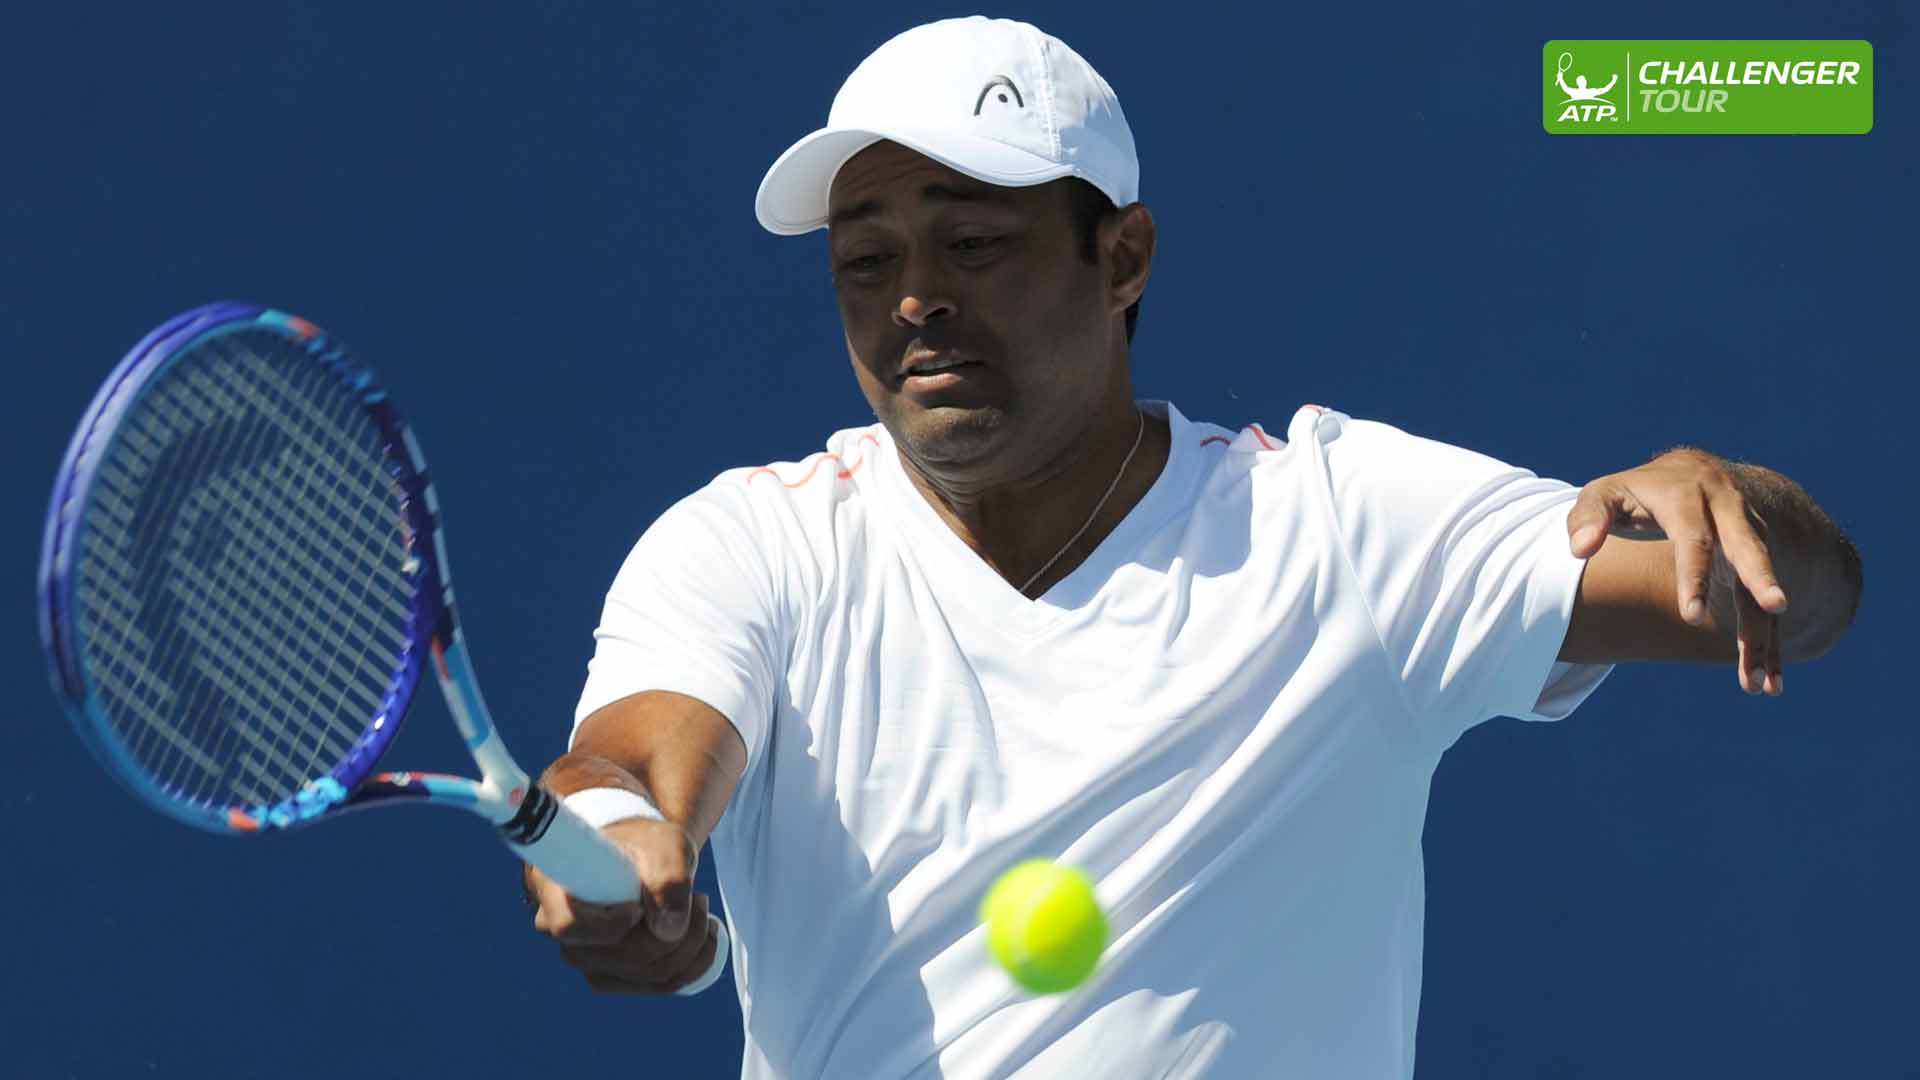 Leander Paes won his first ATP Challenger Tour doubles title in 16 years at last week's event in Busan. 